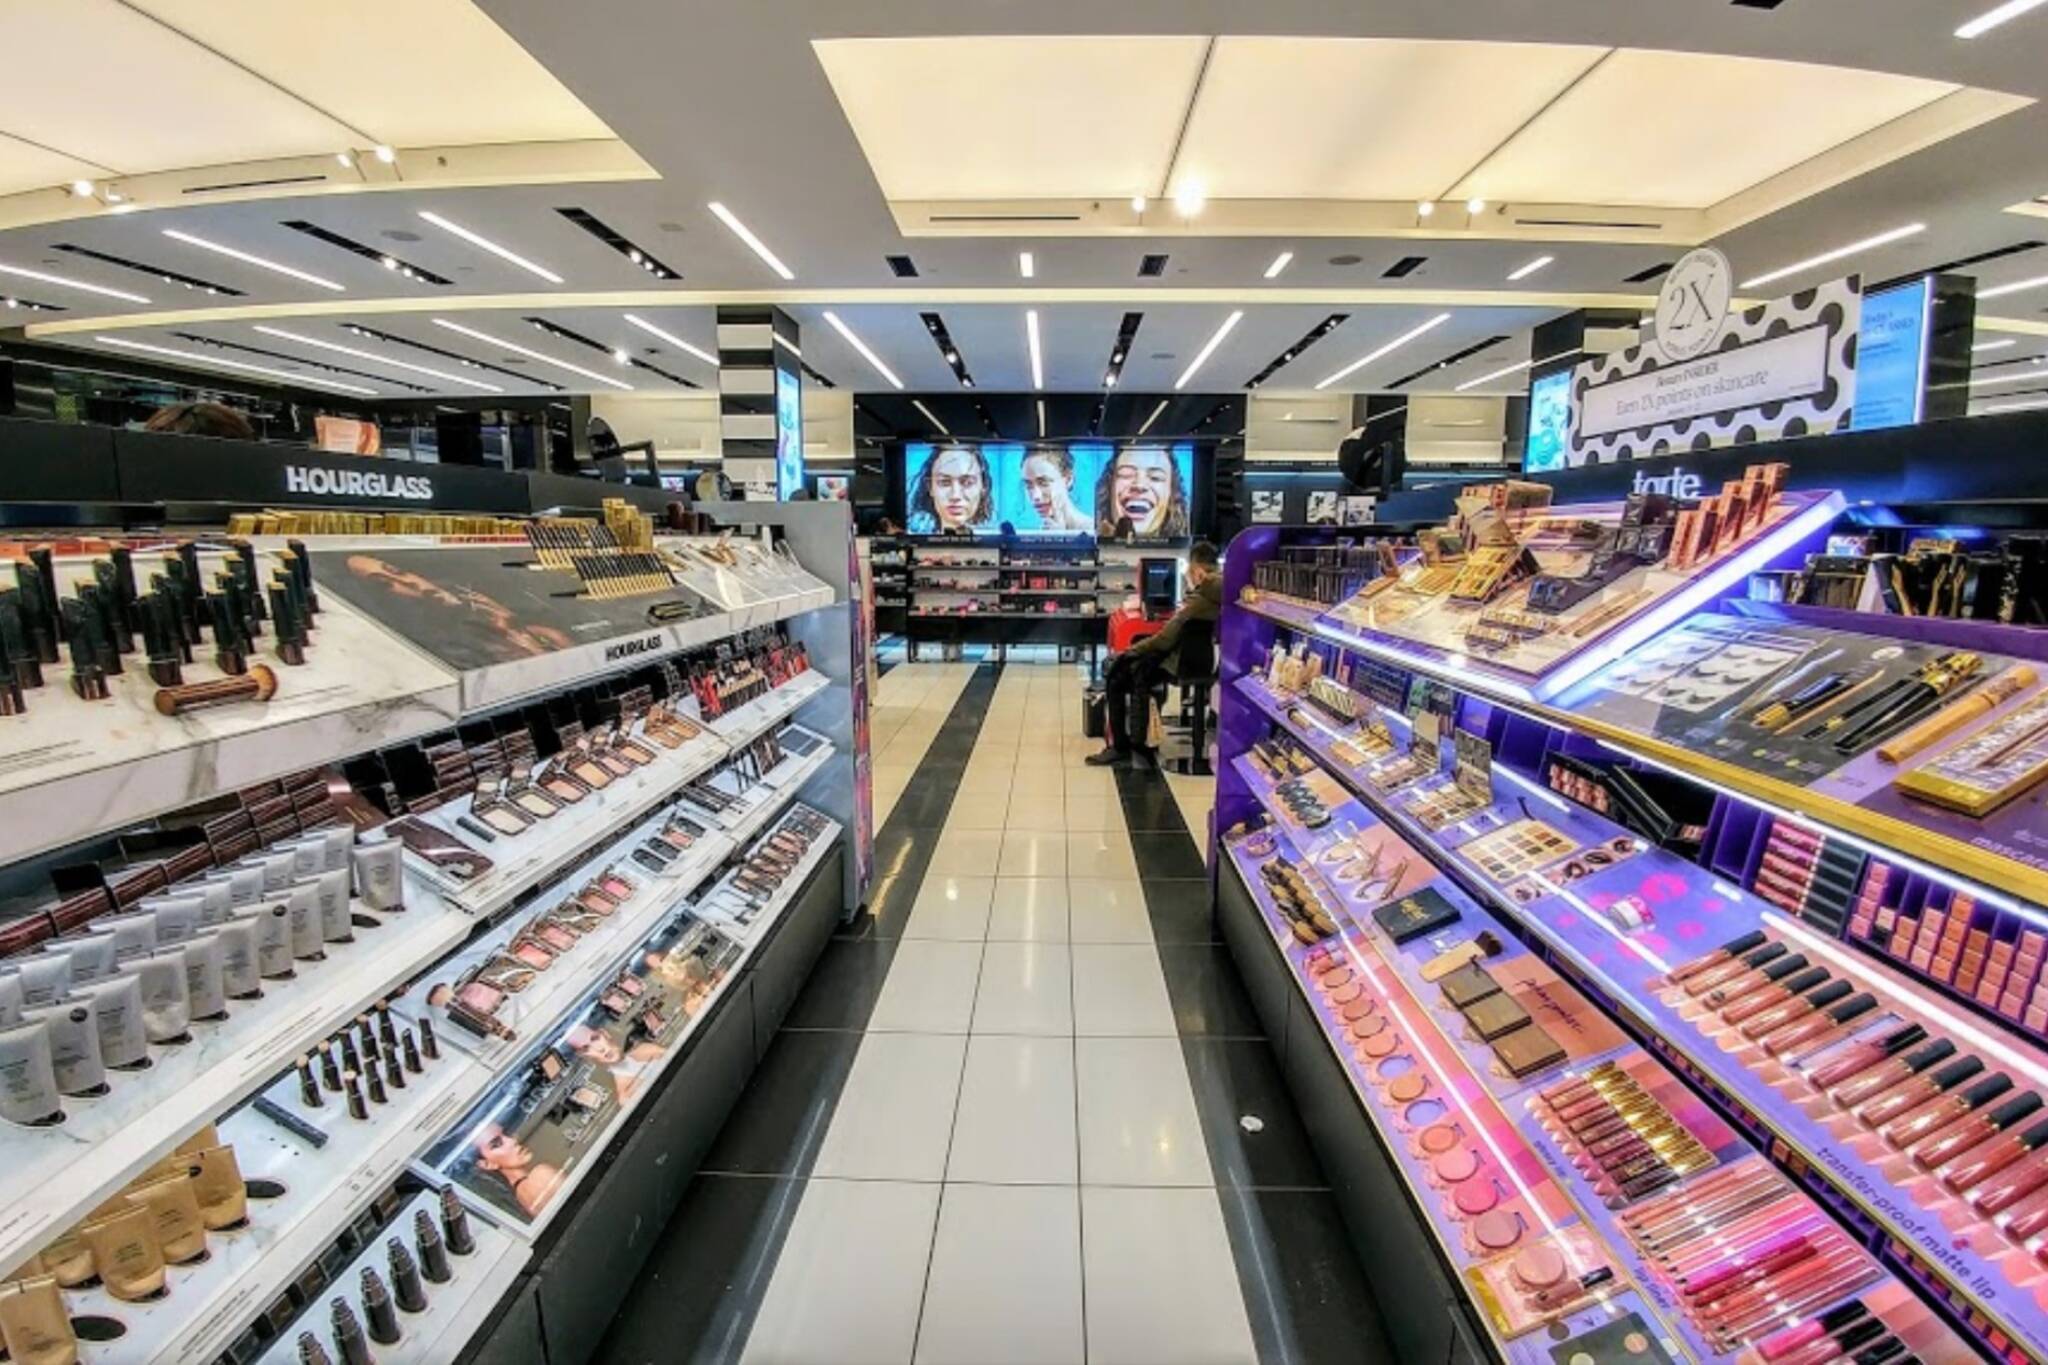 Toronto upset after Sephora promotion goes totally wrong